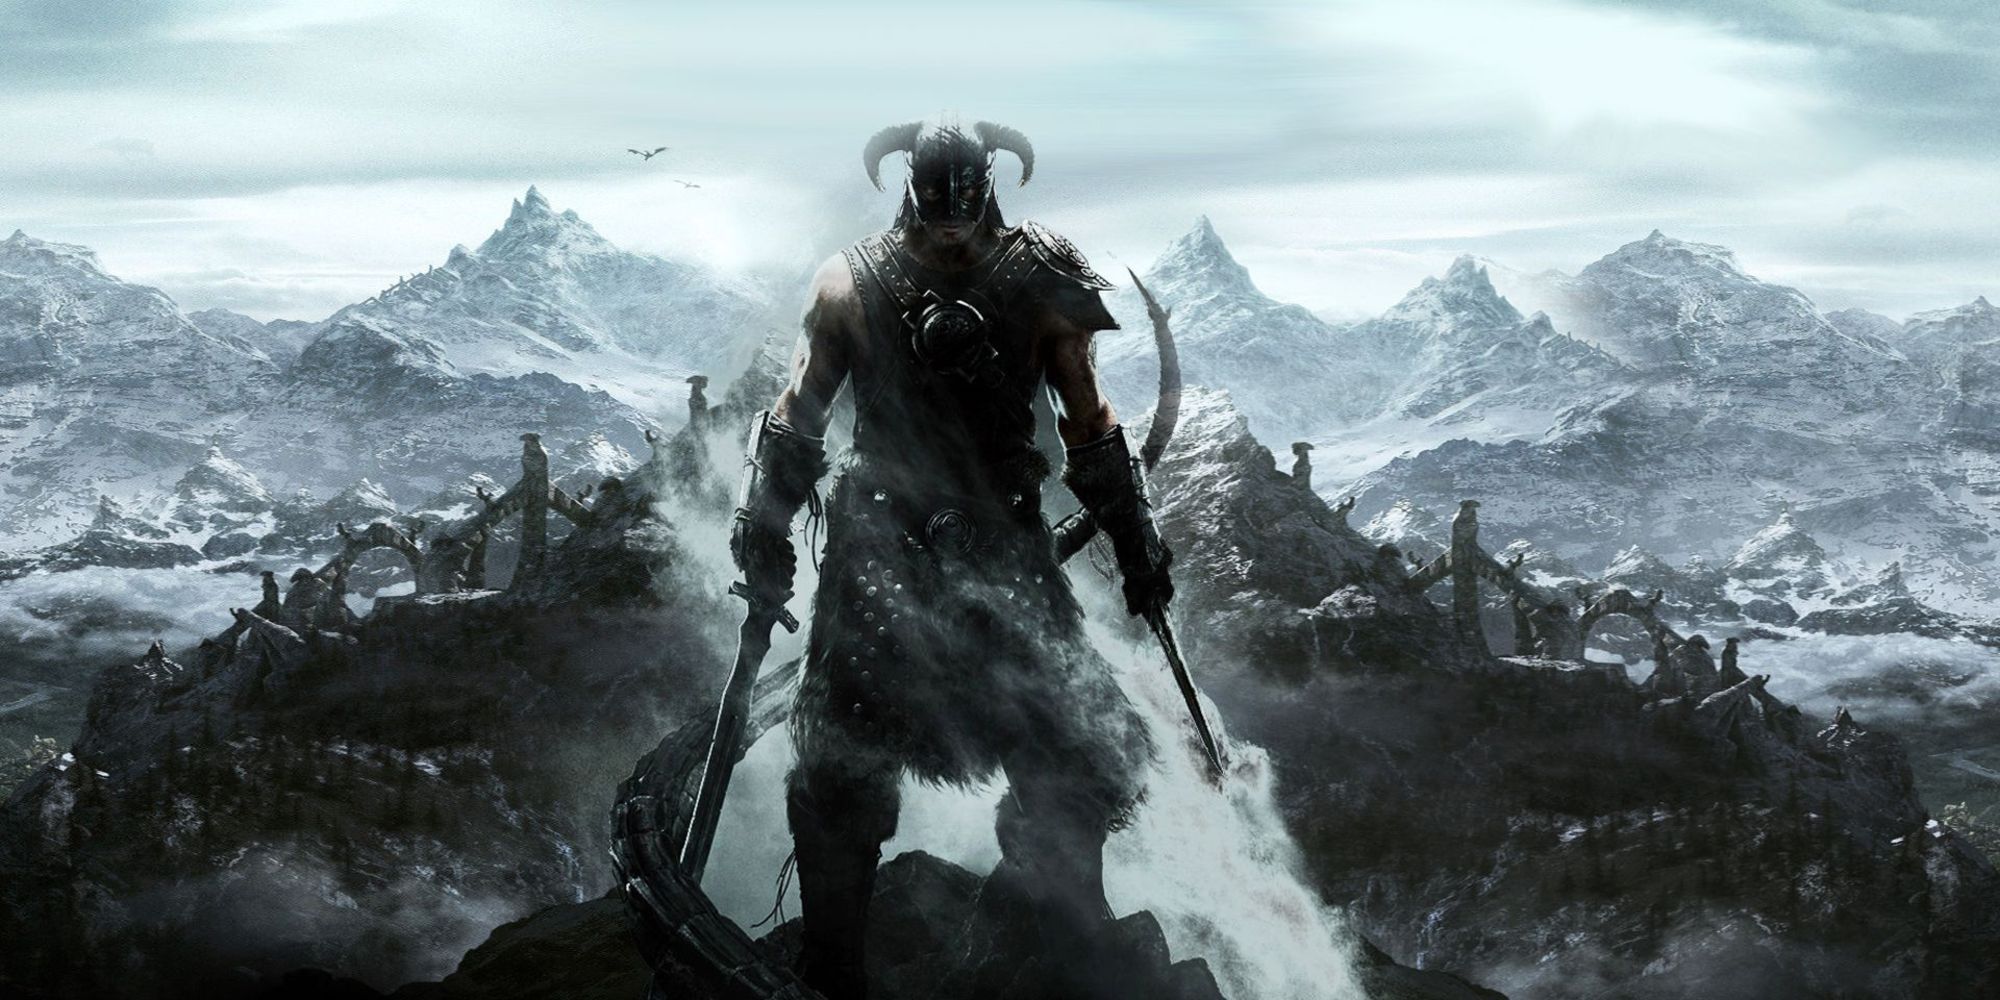 Skyrim: 10 Ways To Get Started Playing Your First Game